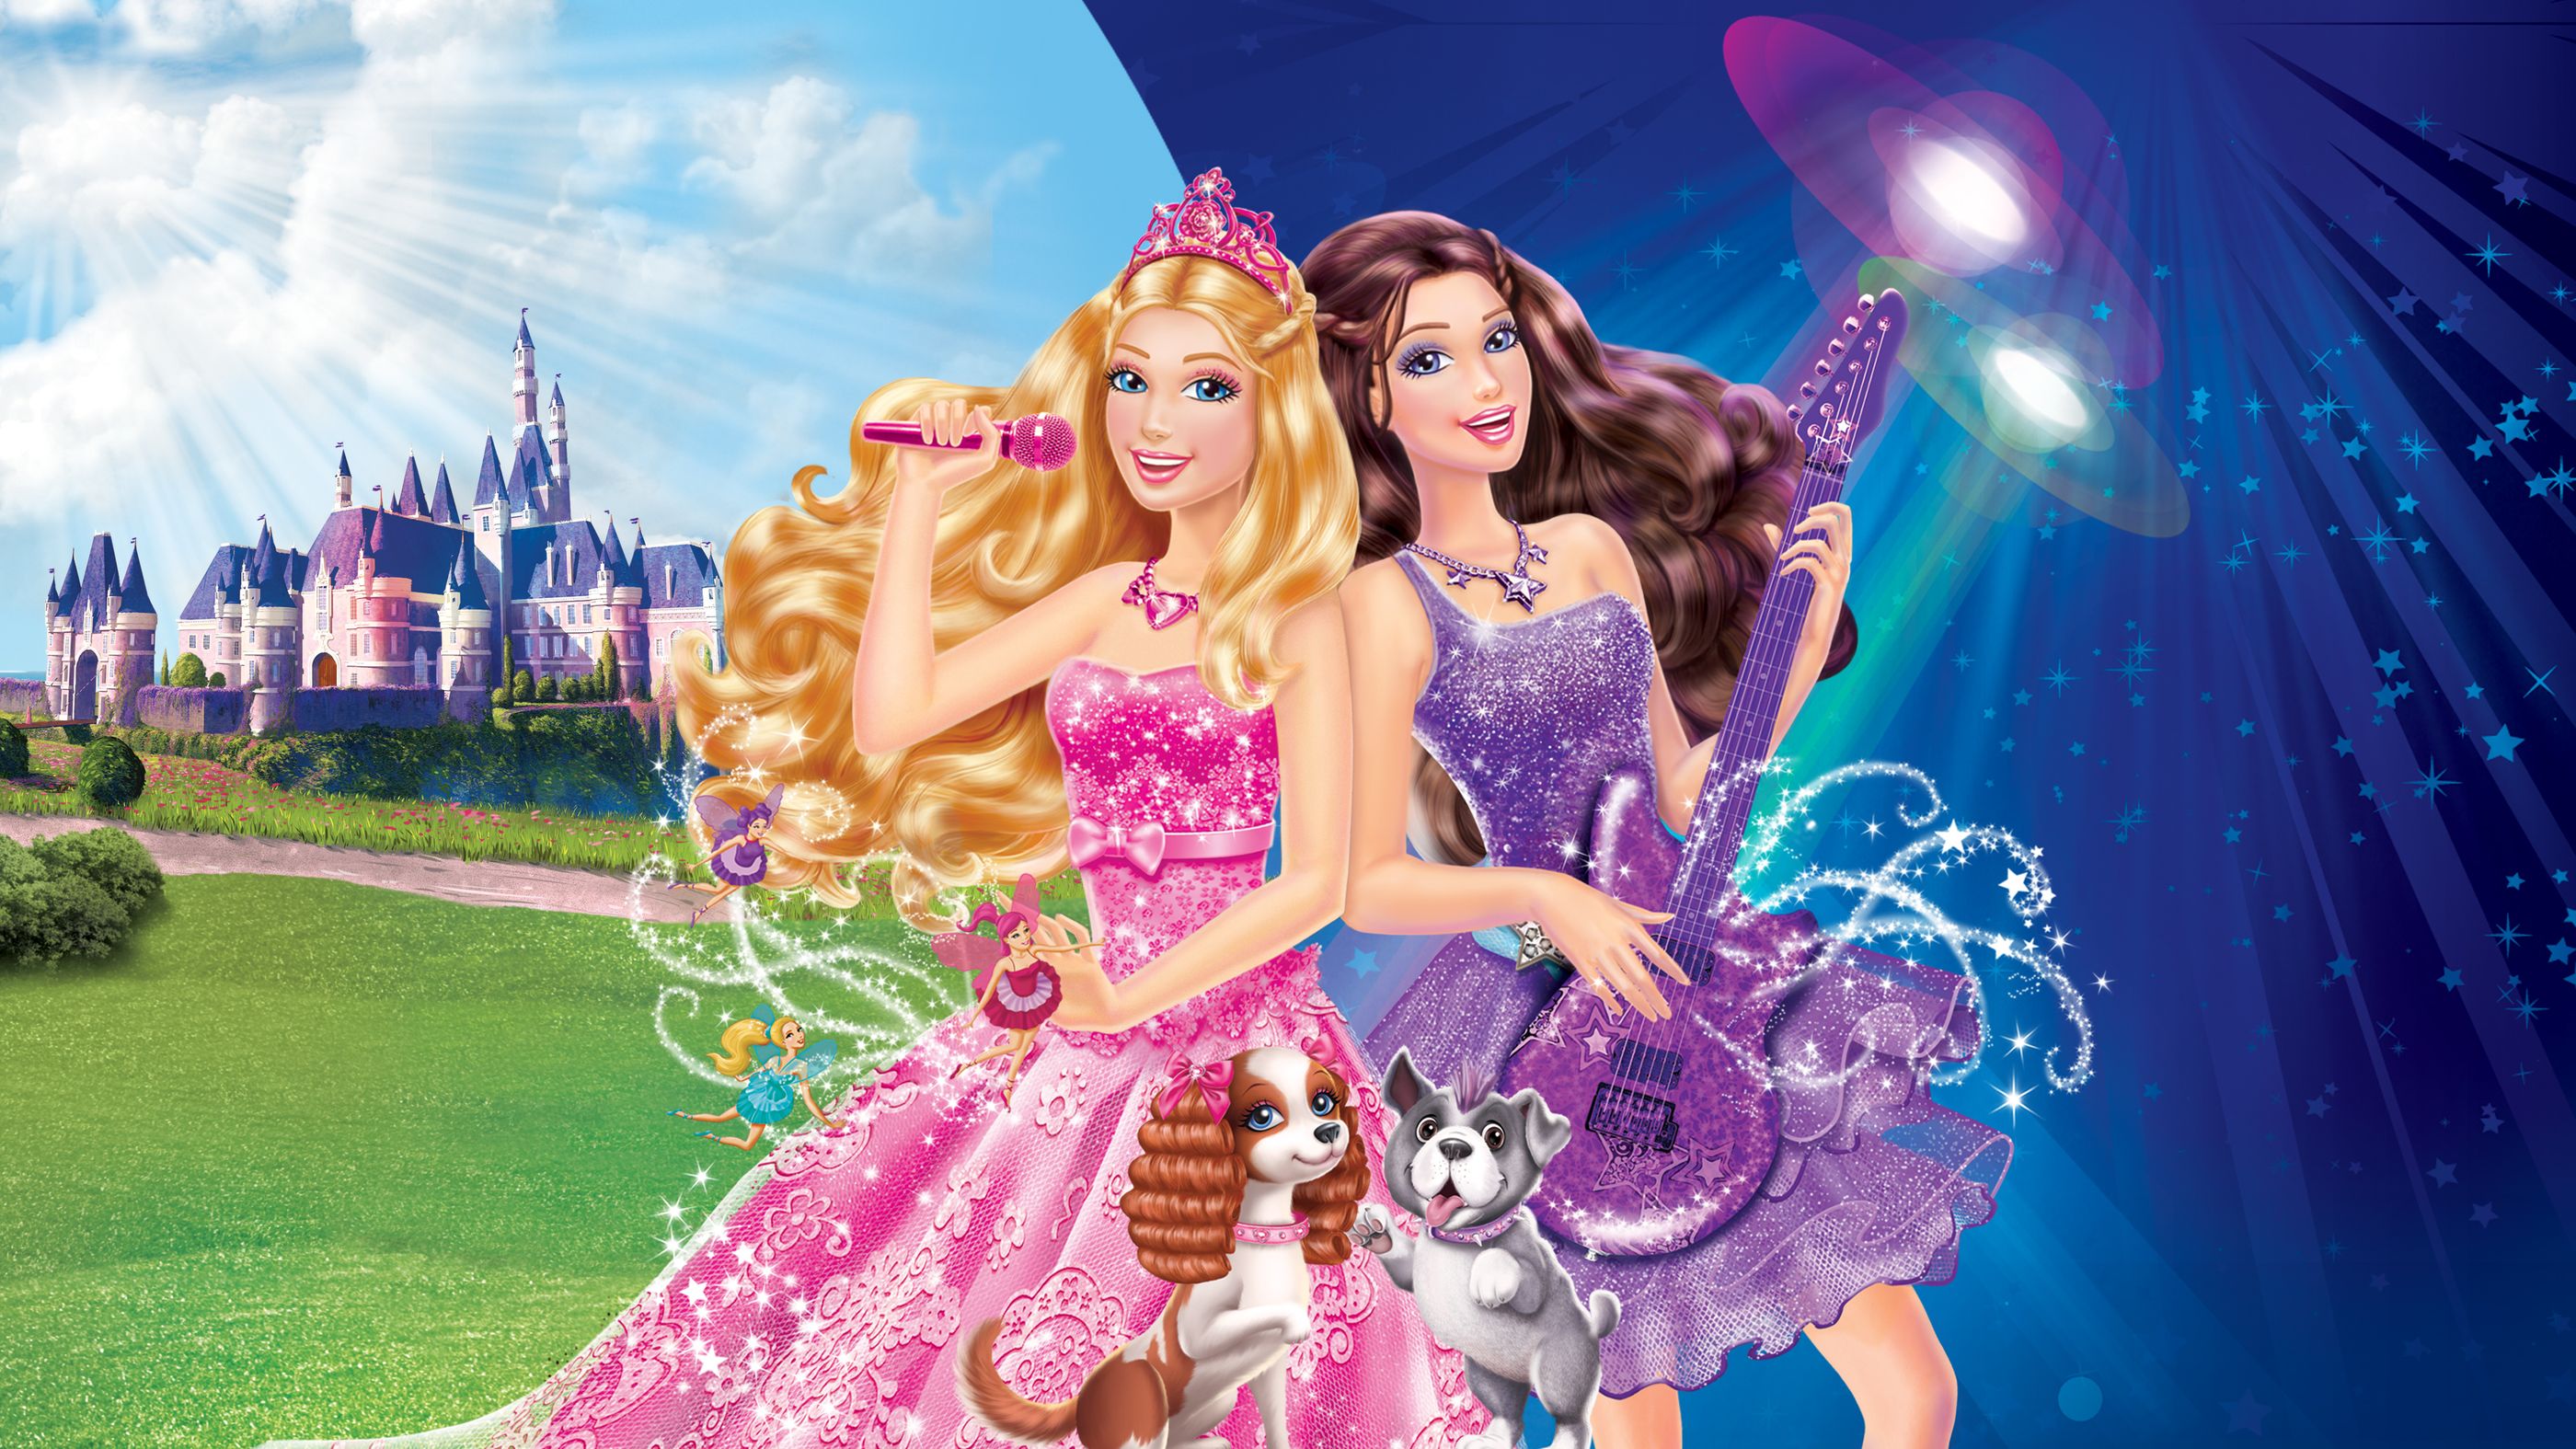 barbie doll princess and the popstar